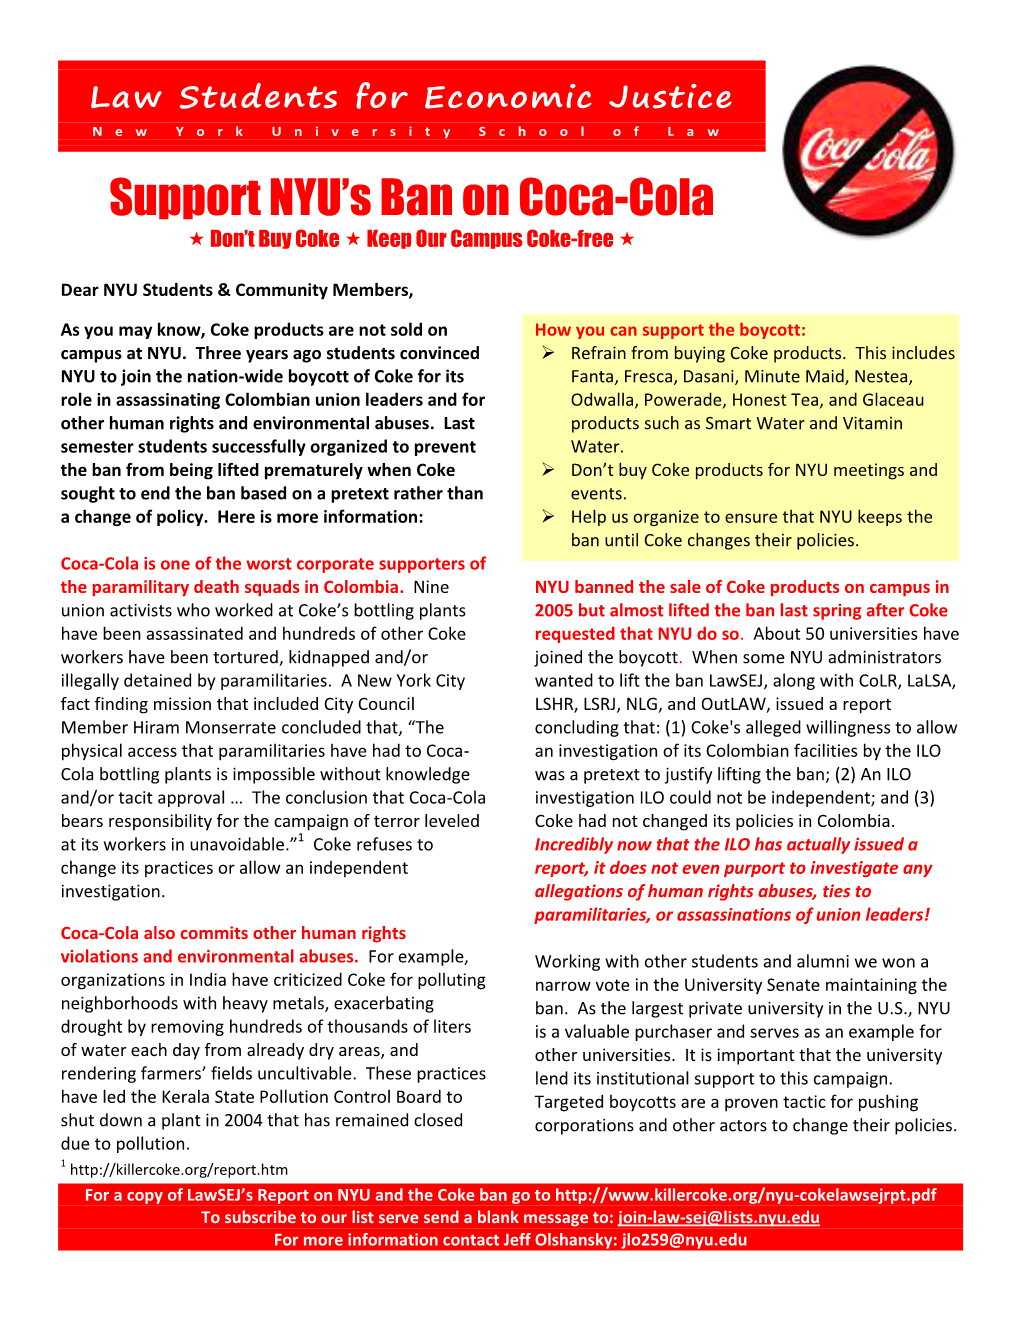 Support NYU's Ban on Coca-Cola